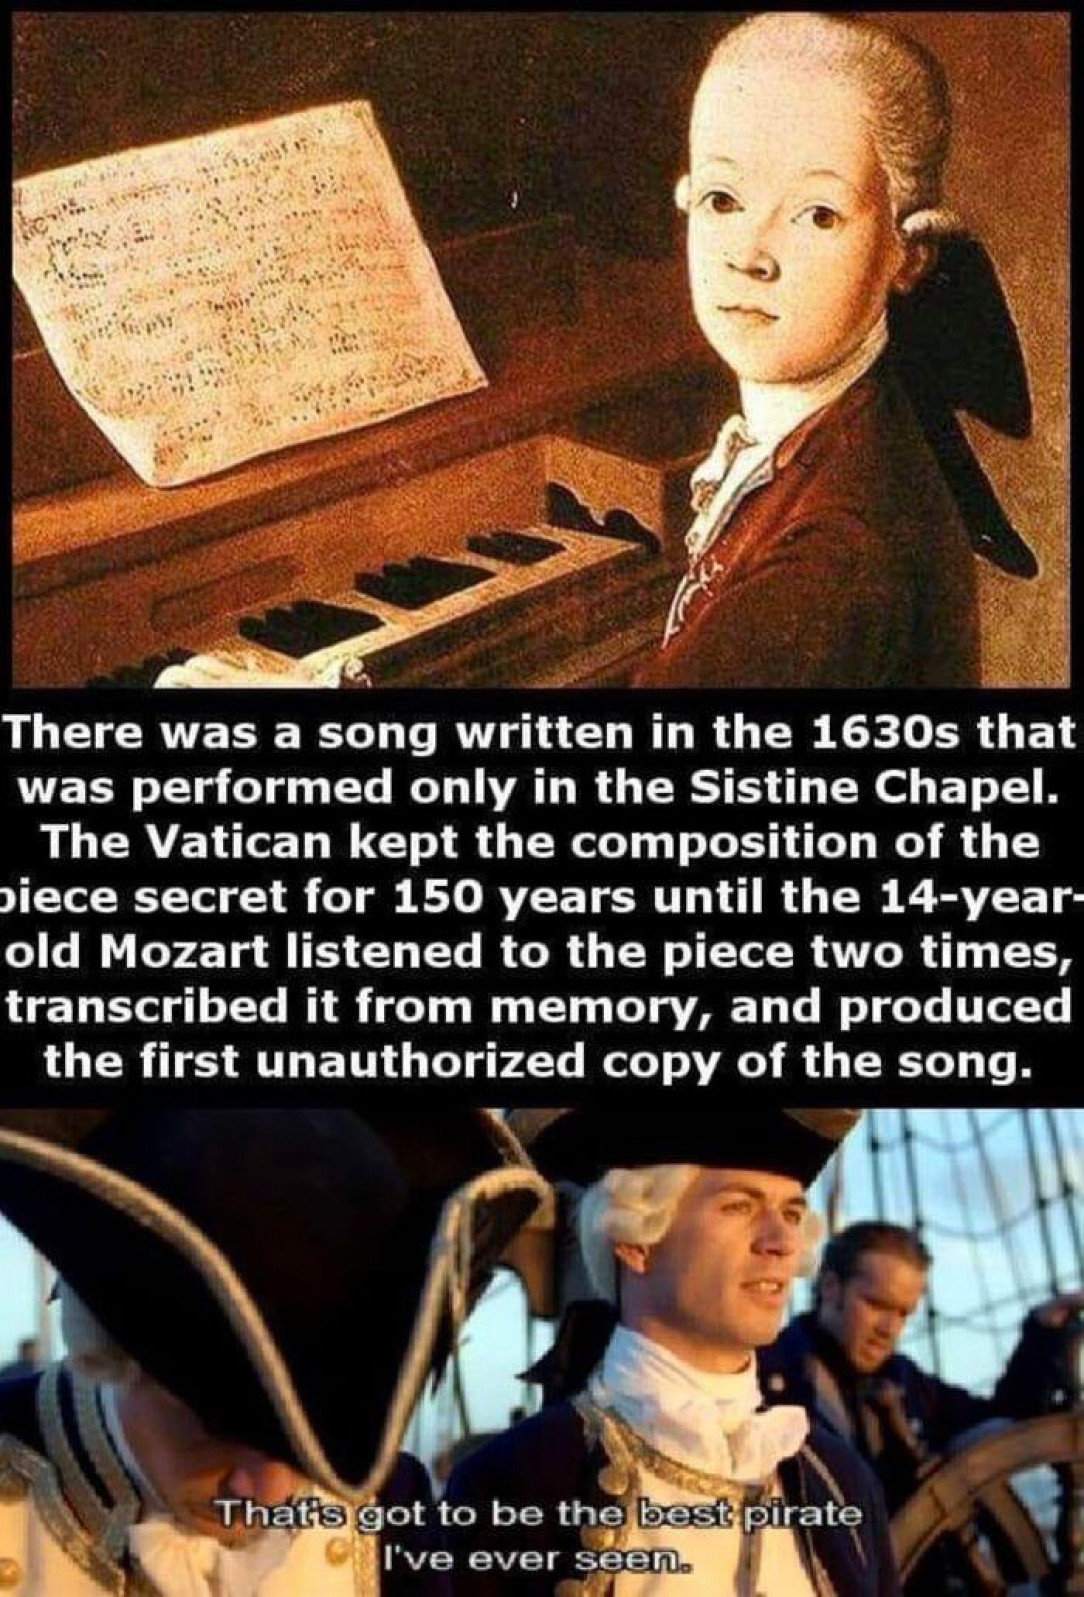 The first music piracy